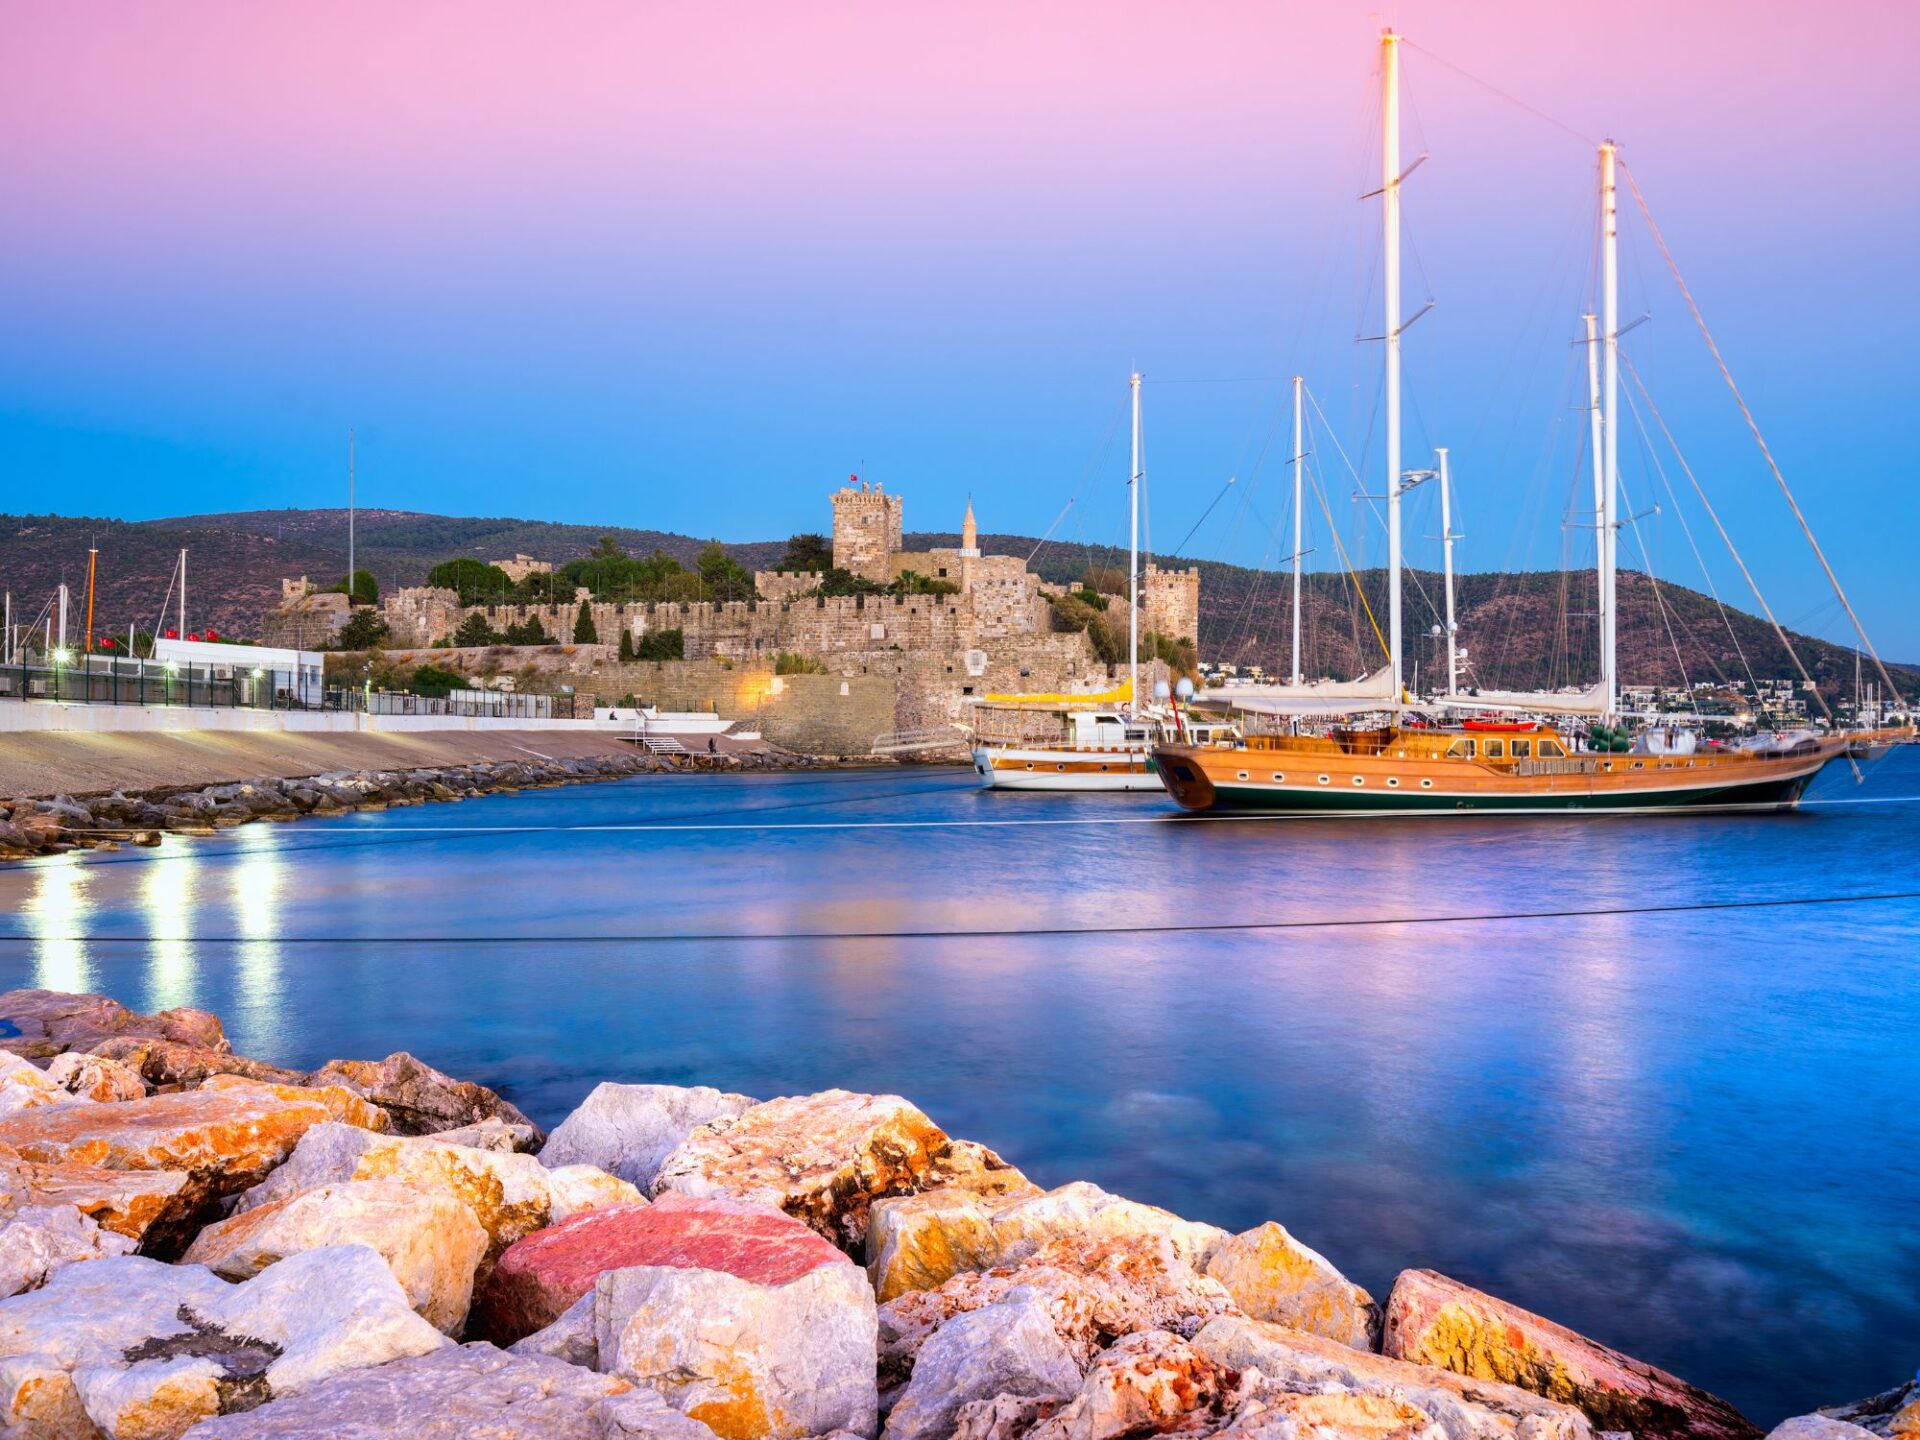 What to see on your first visit to Turkey from UAE - Bodrum